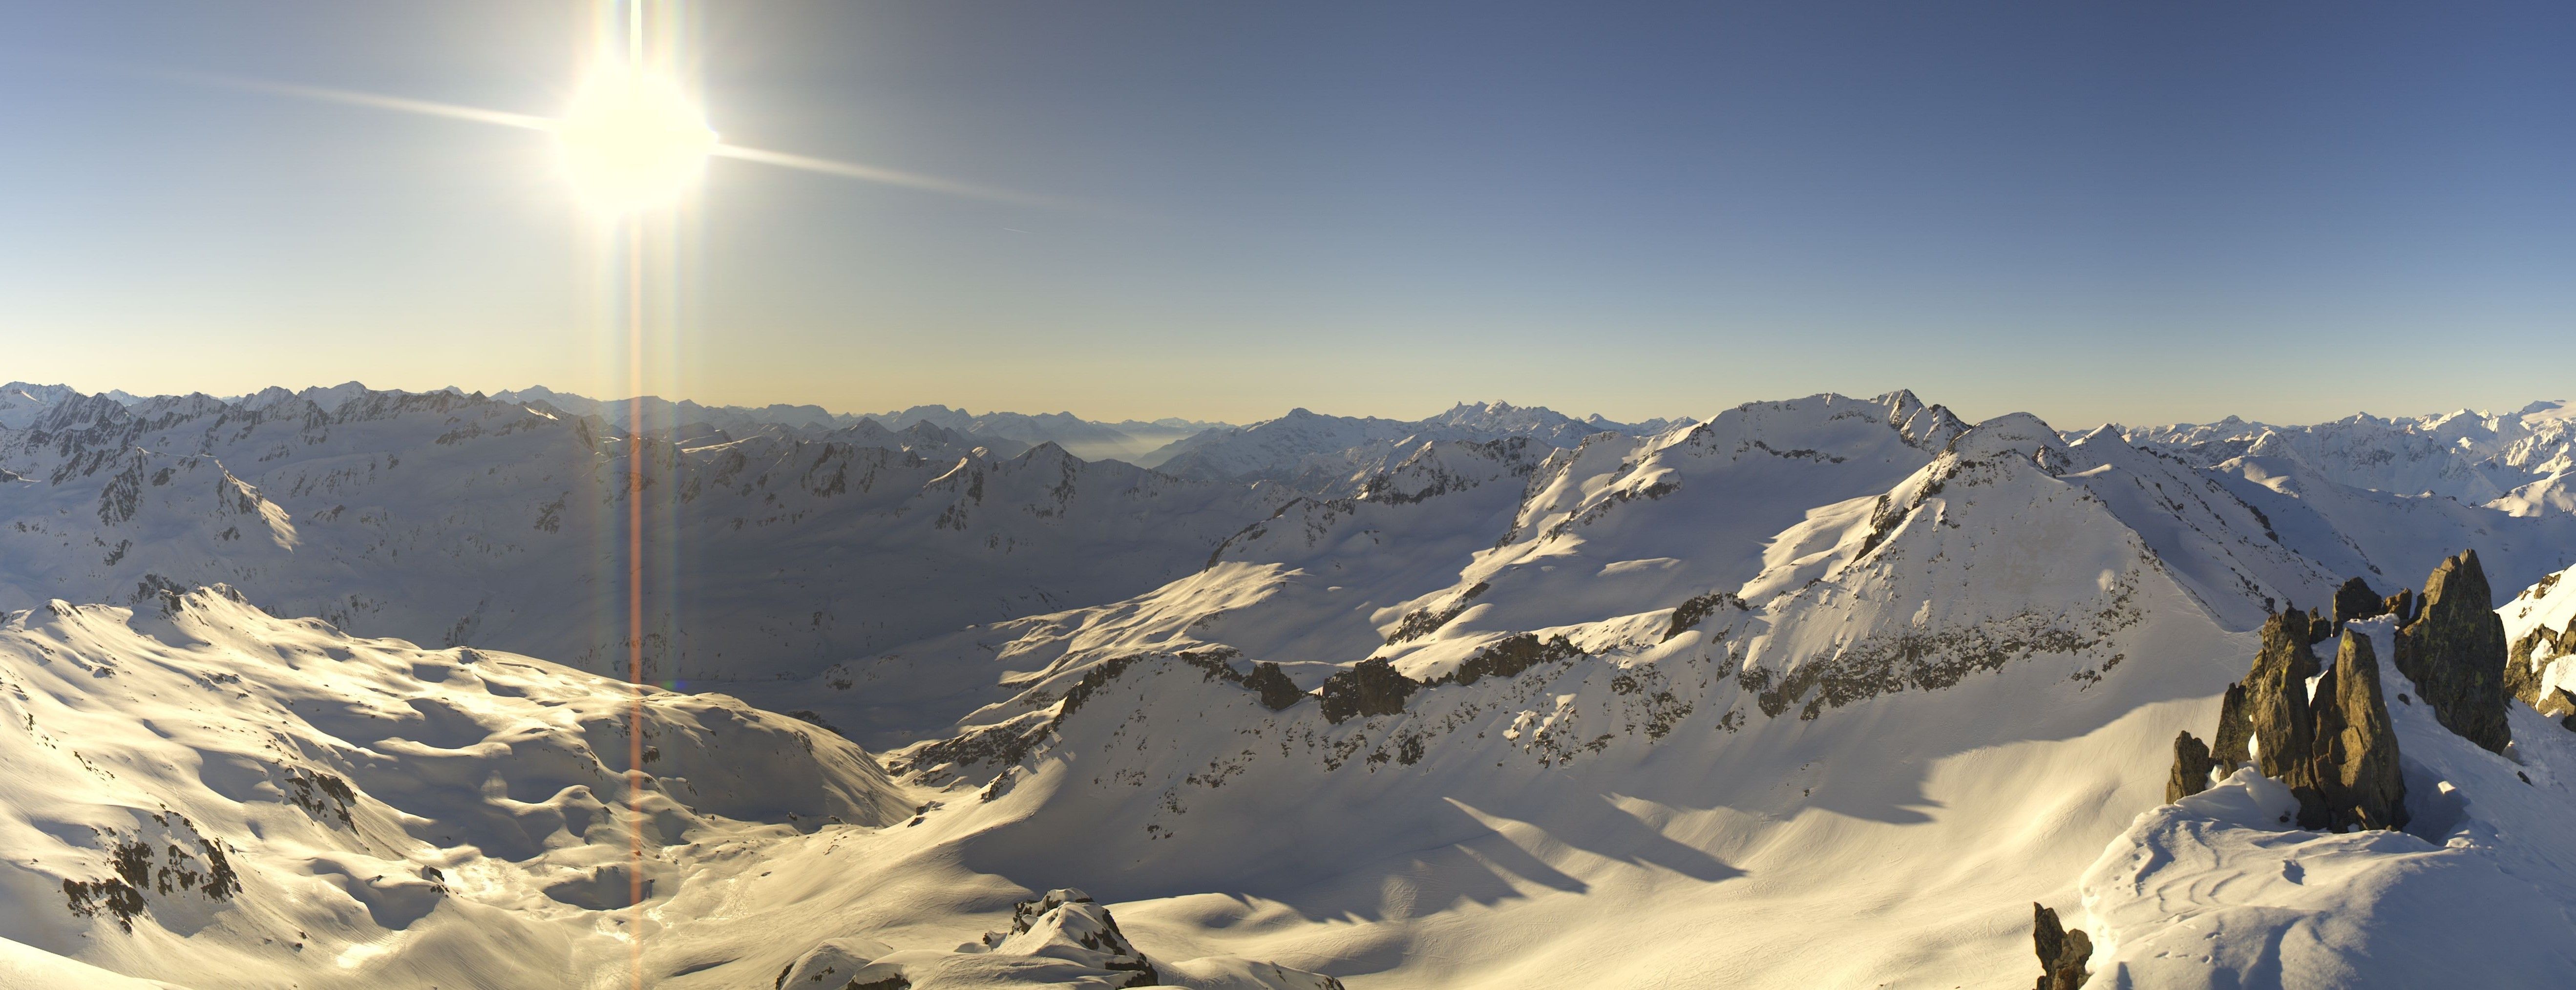 A great start of the day from the Gemsstock in Andermatt (roundshot.com)